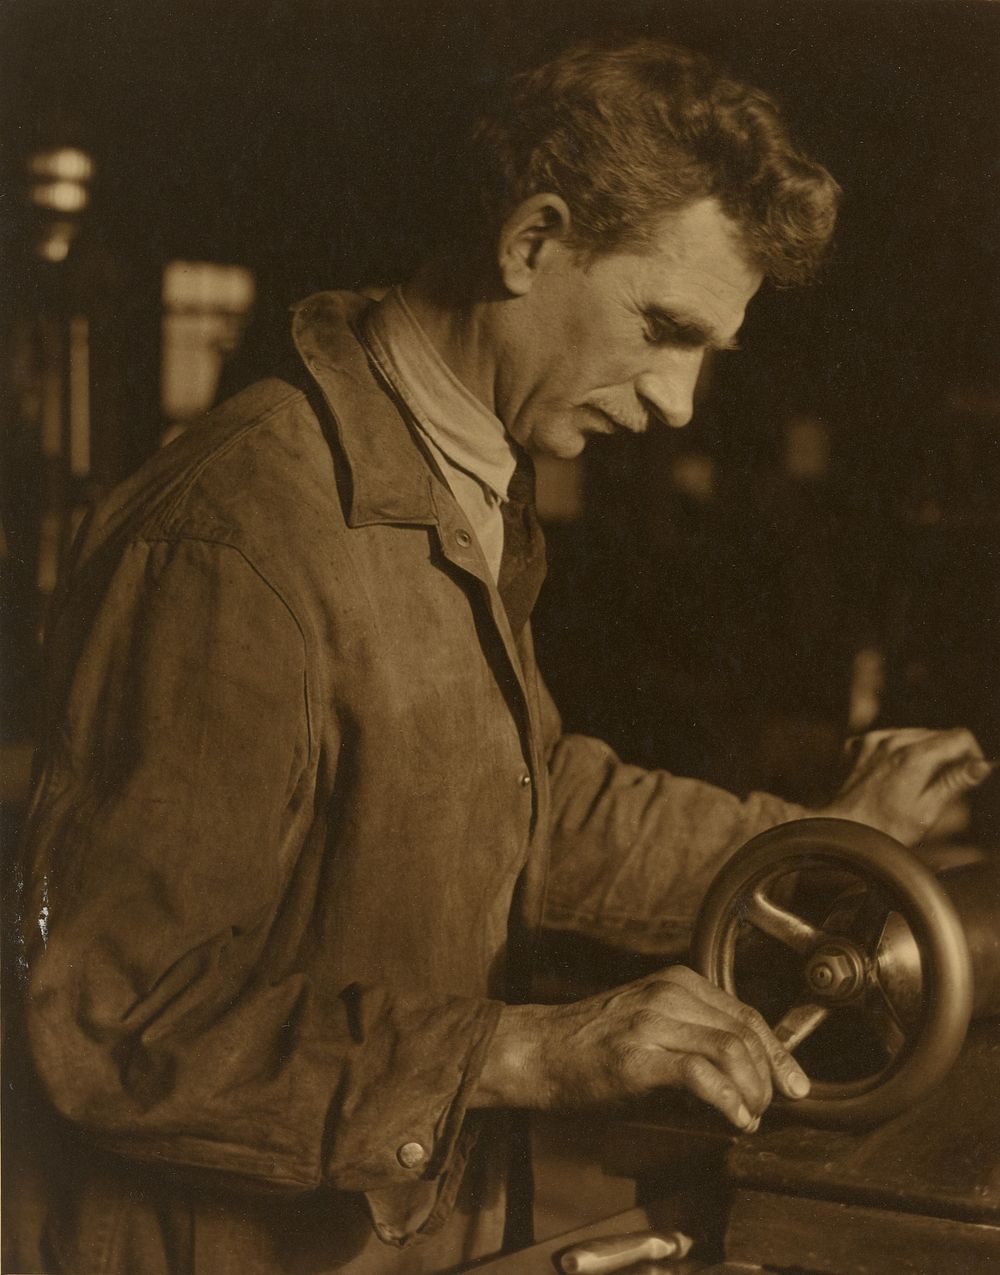 Machinist by Lewis W Hine